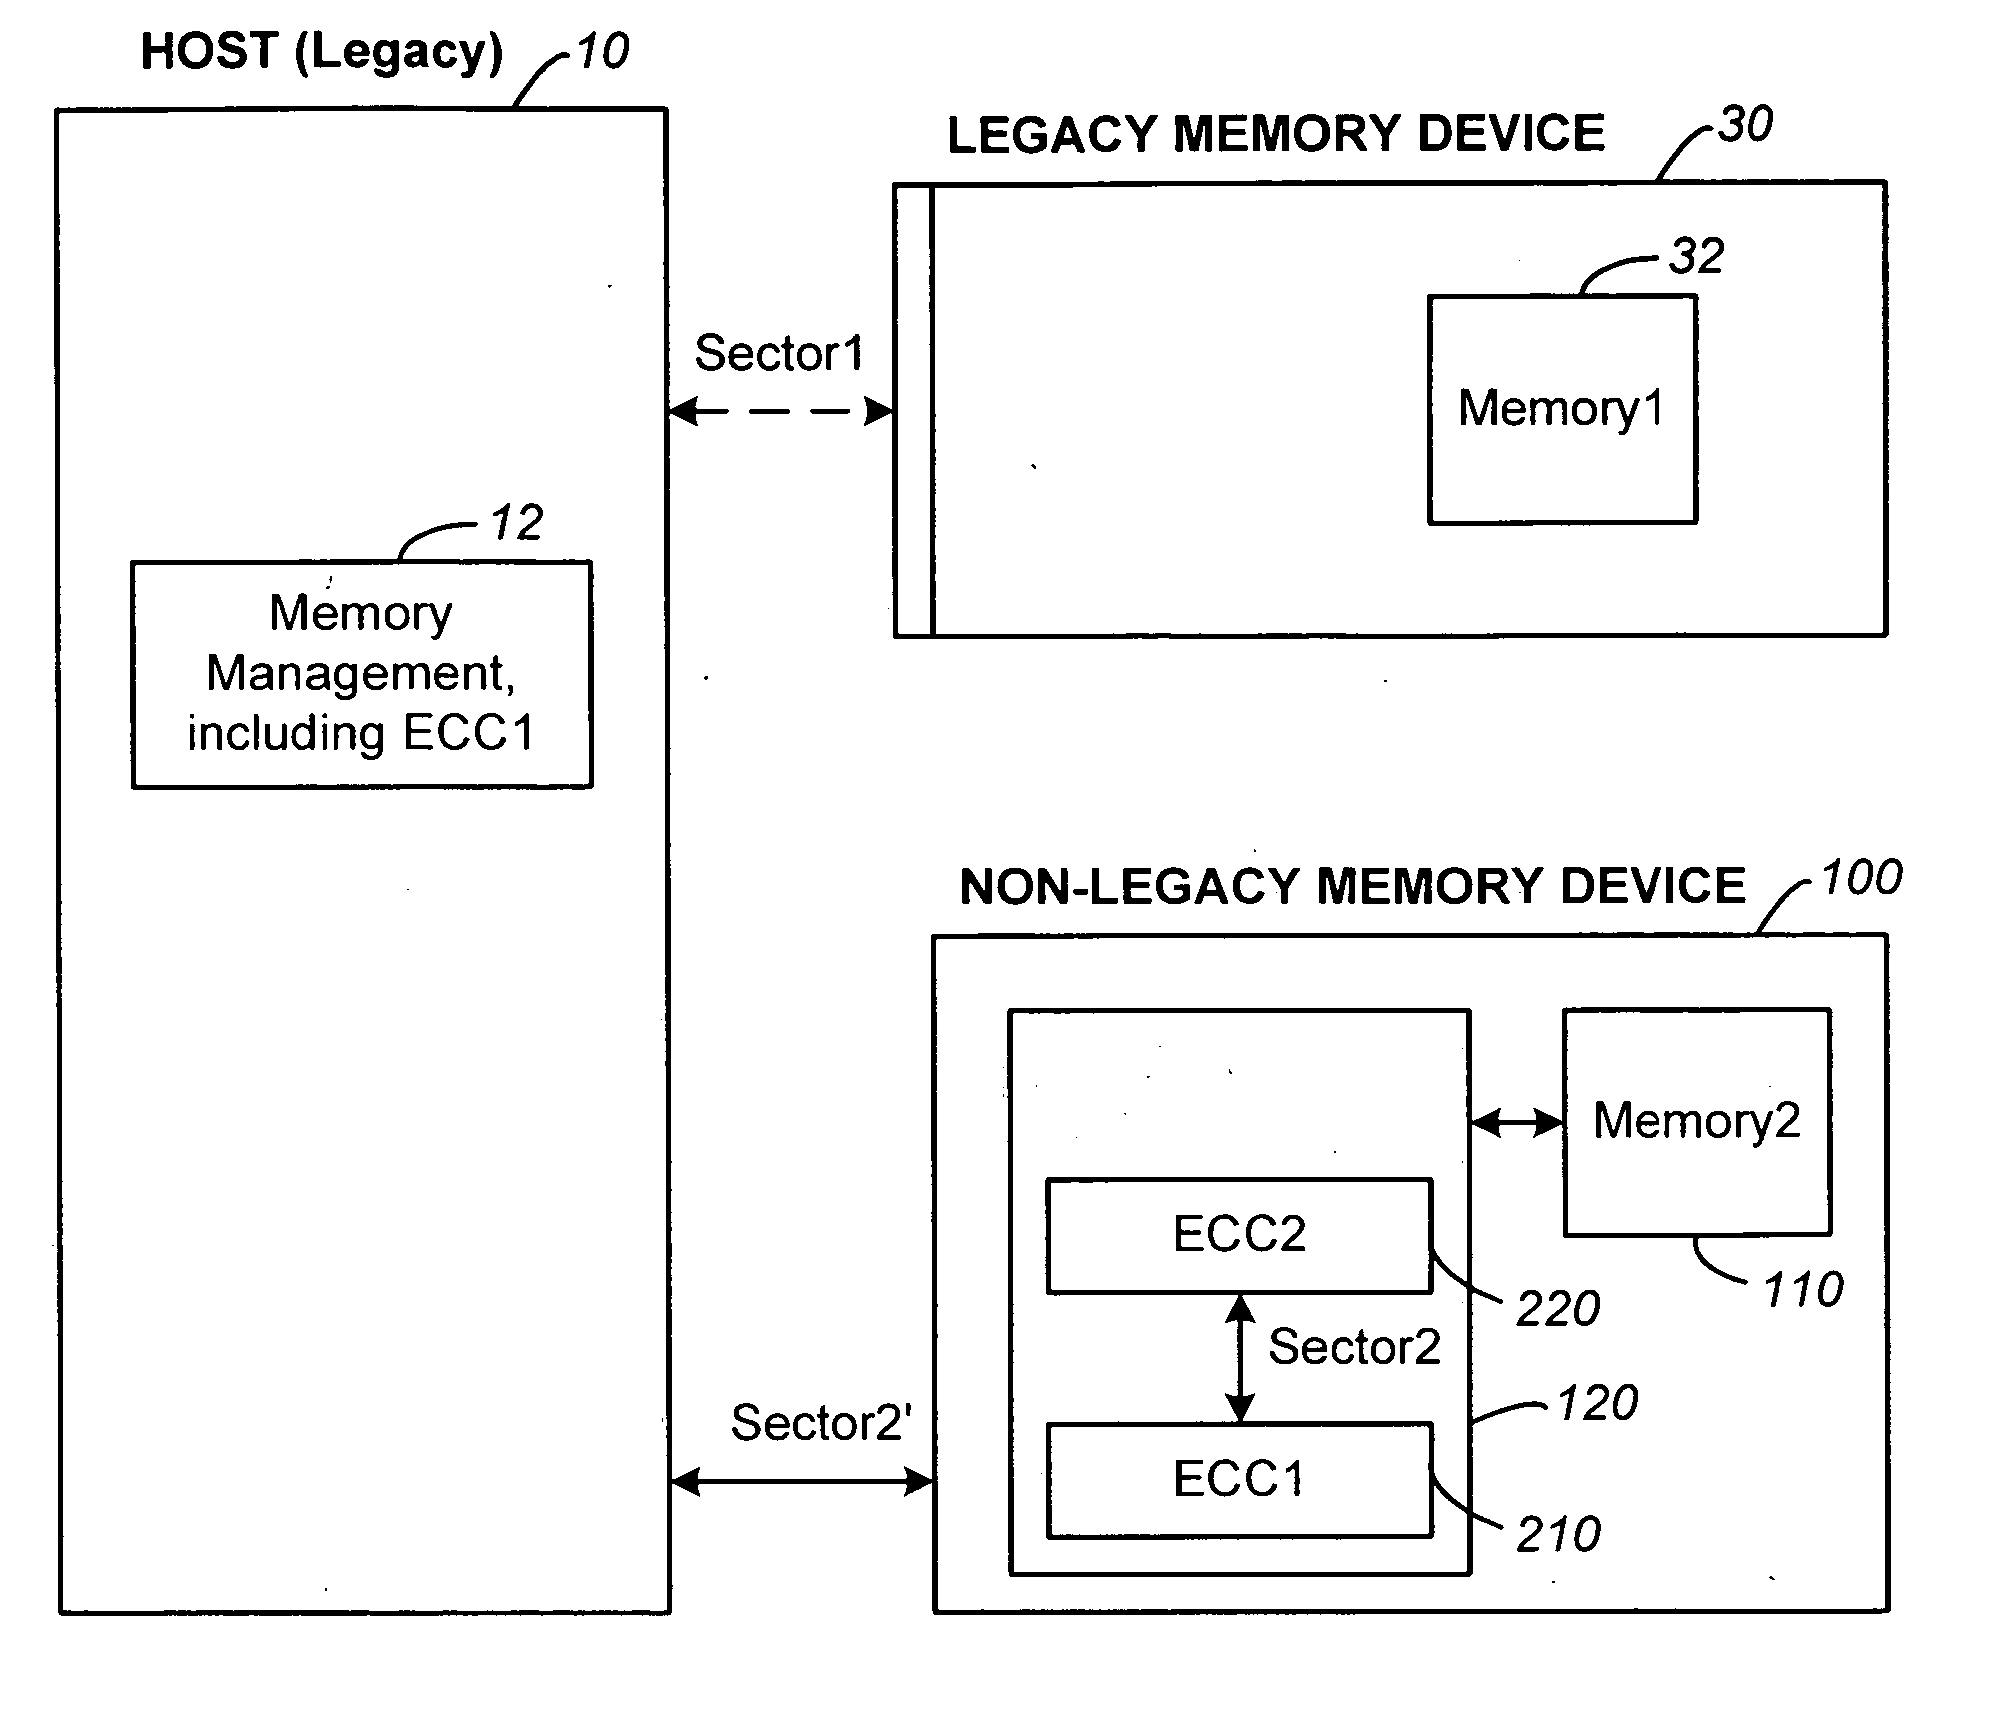 Memory system for legacy hosts